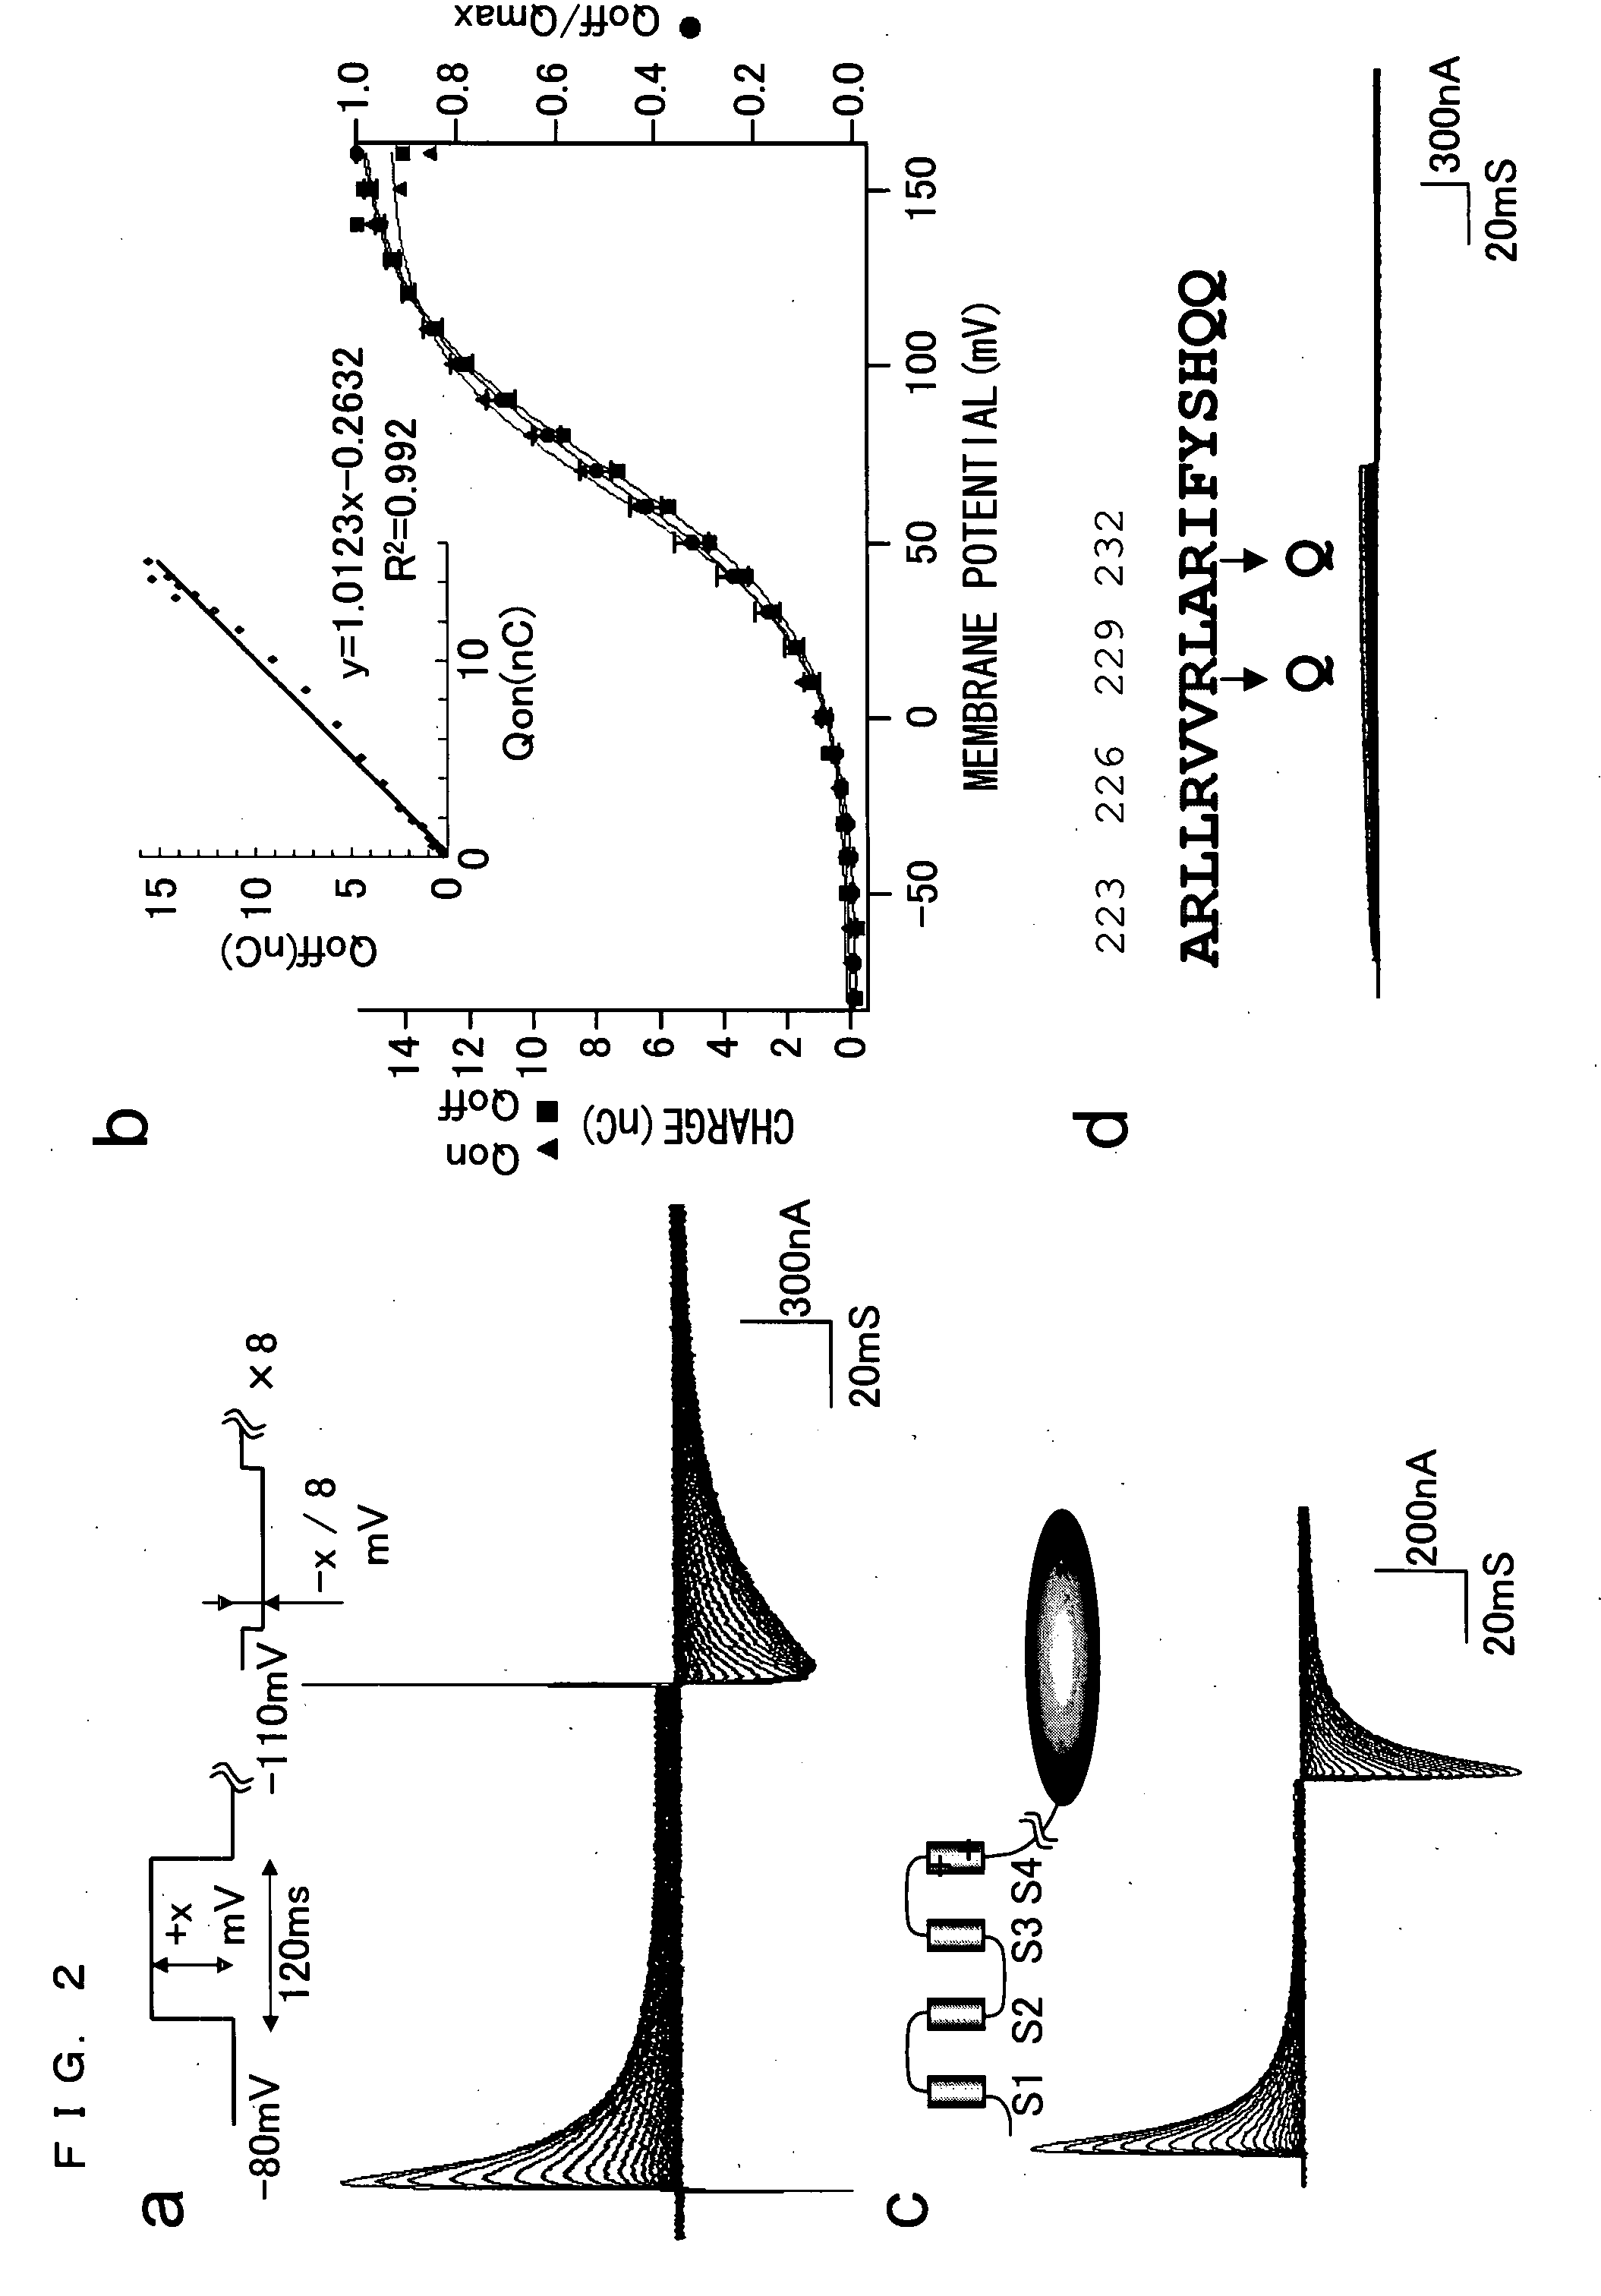 Novel Ion Channel-Like Polypeptide and Use Thereof